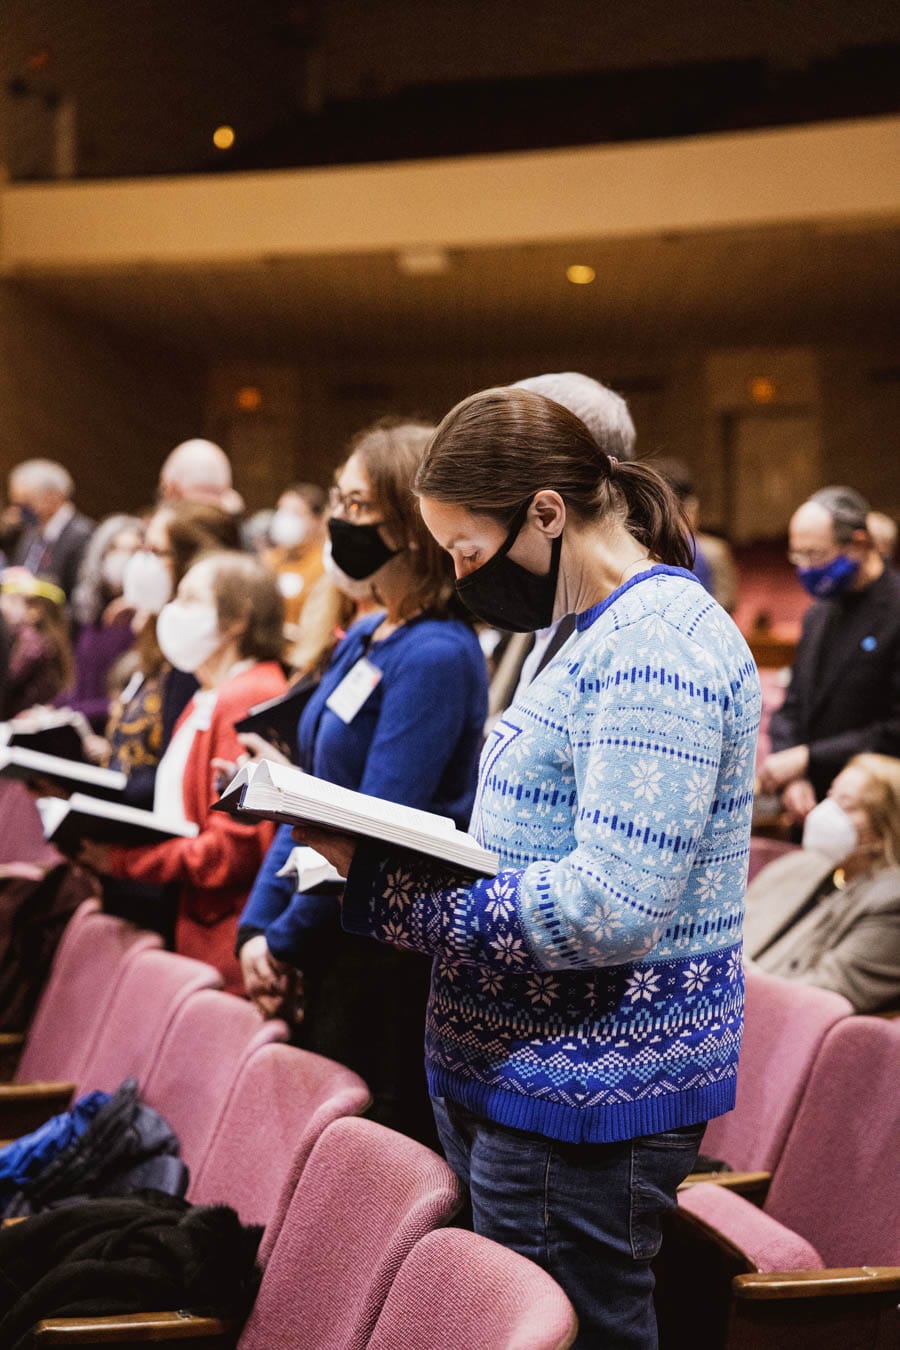 People standing in the Sanctuary during services